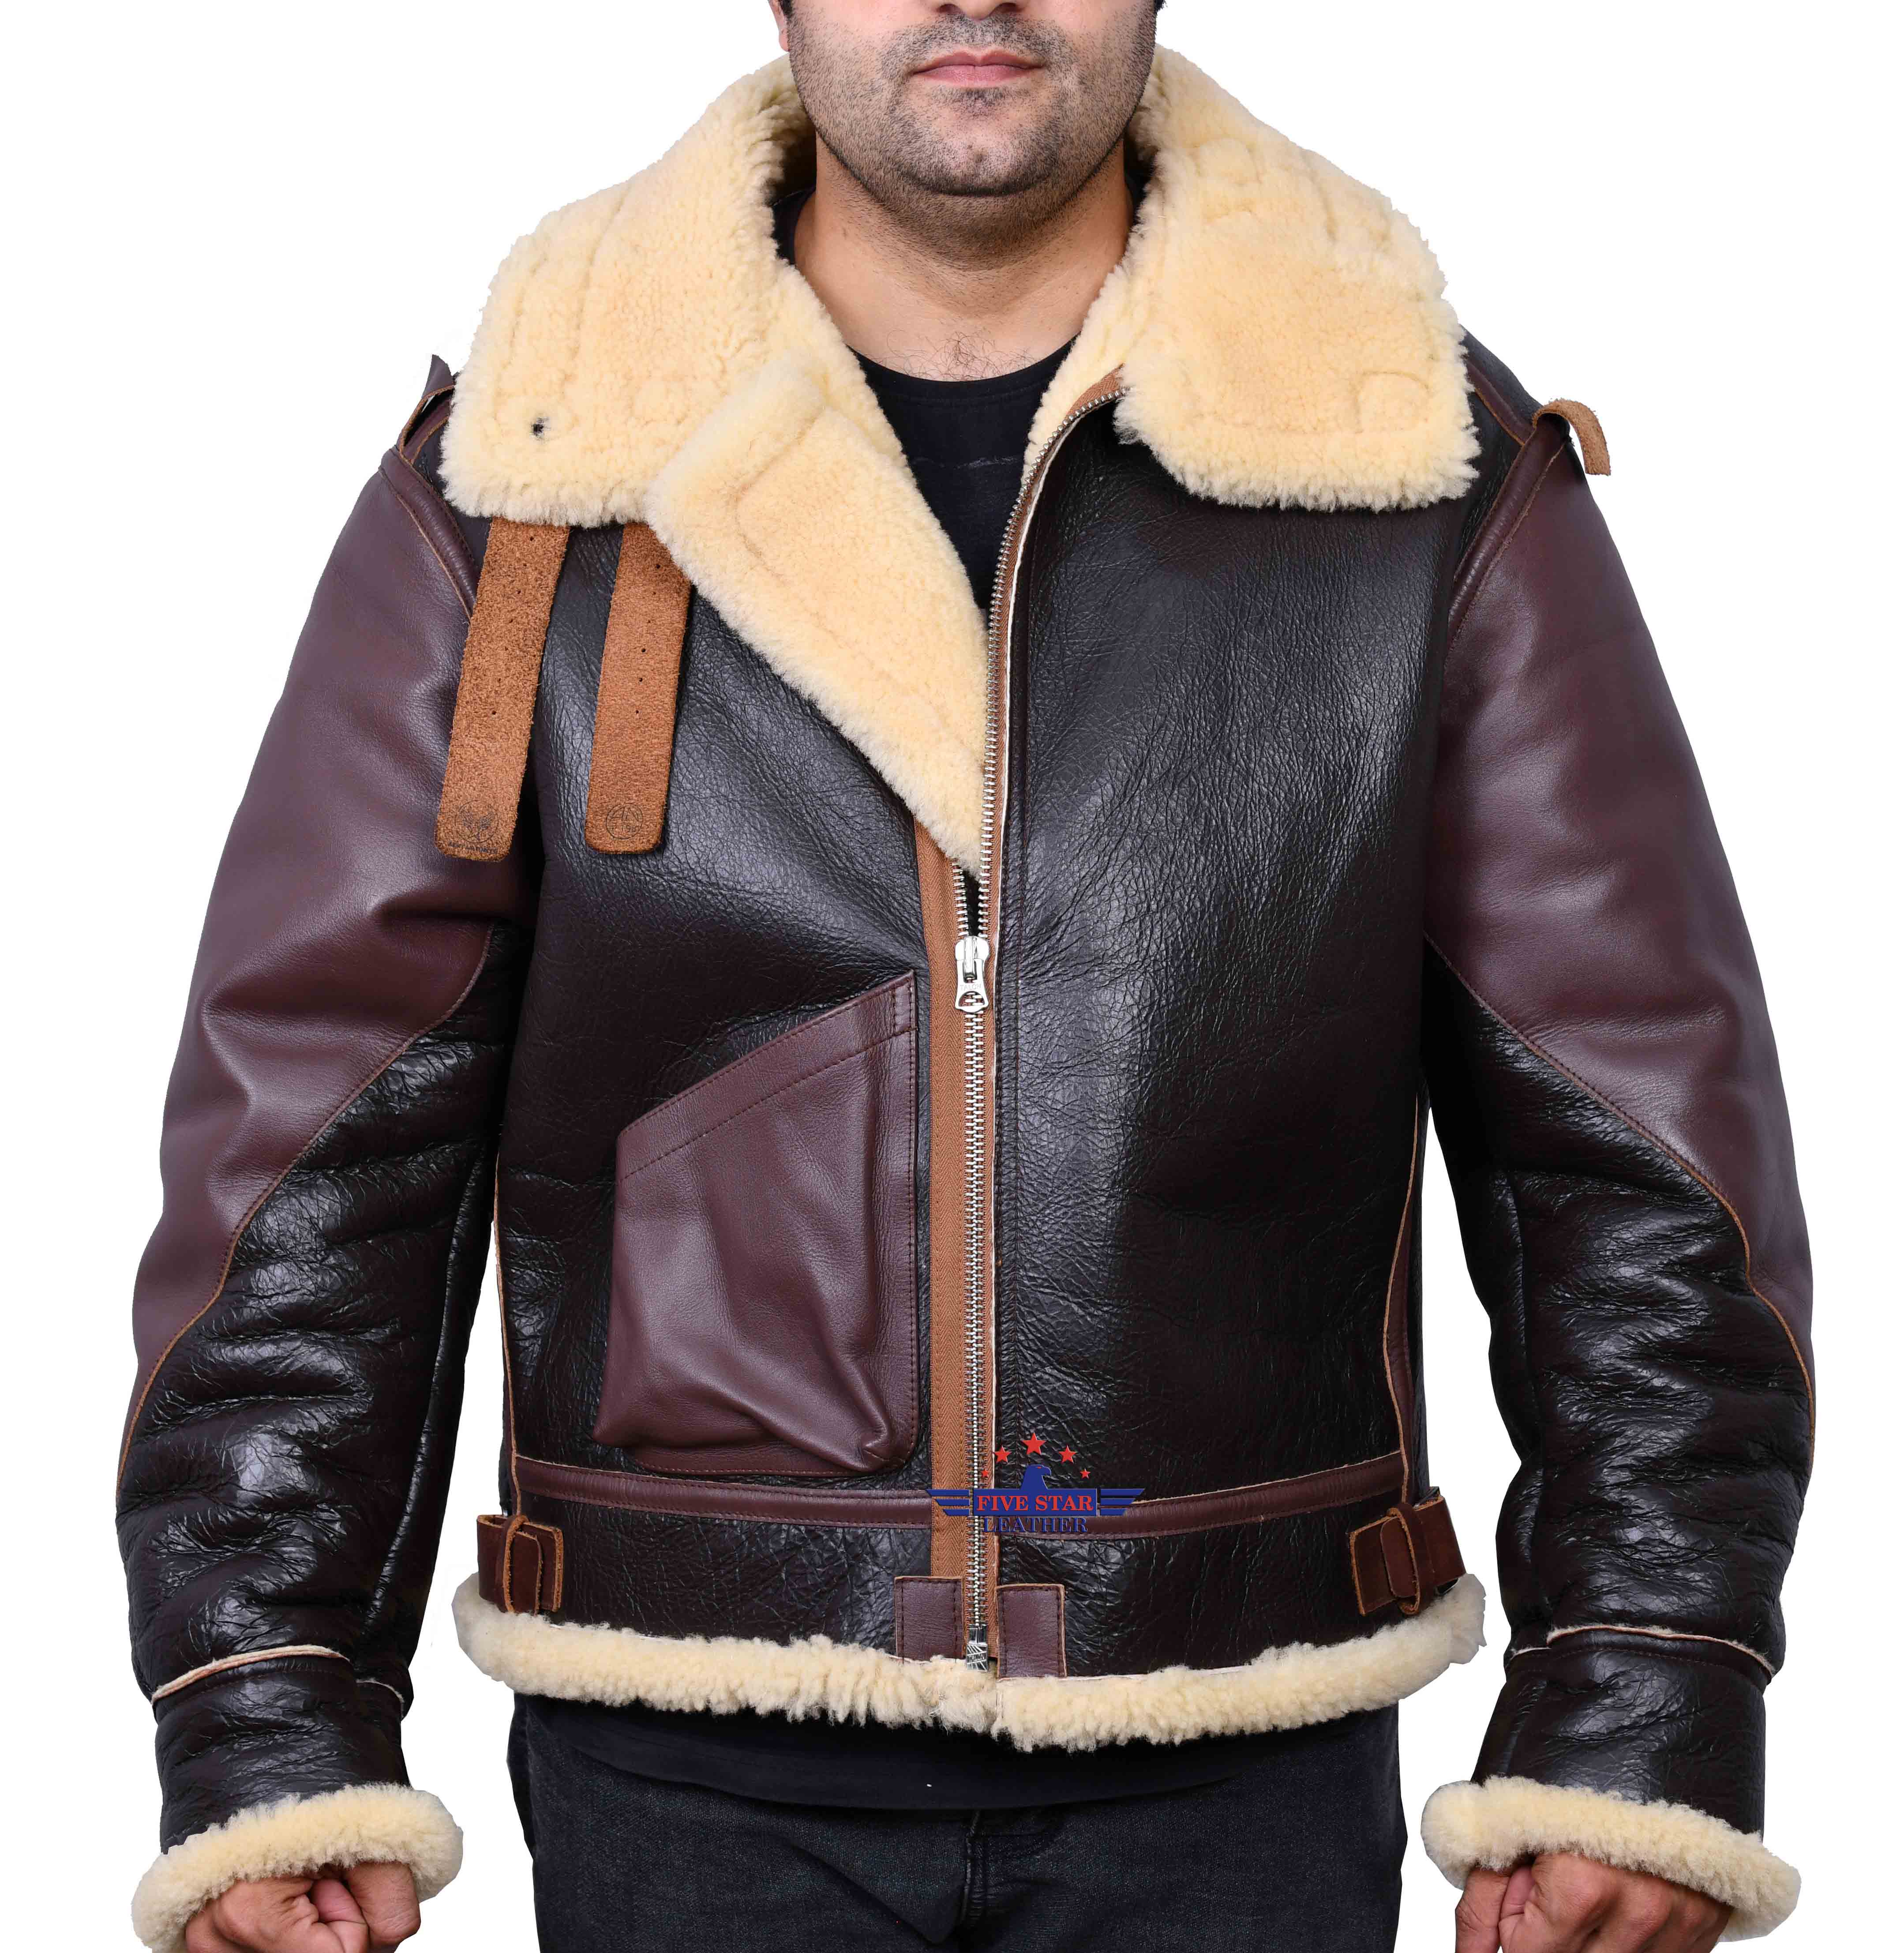 FIVESTAR LEATHER B3 JACKETS | Page 14 | Vintage Leather Jackets Forum